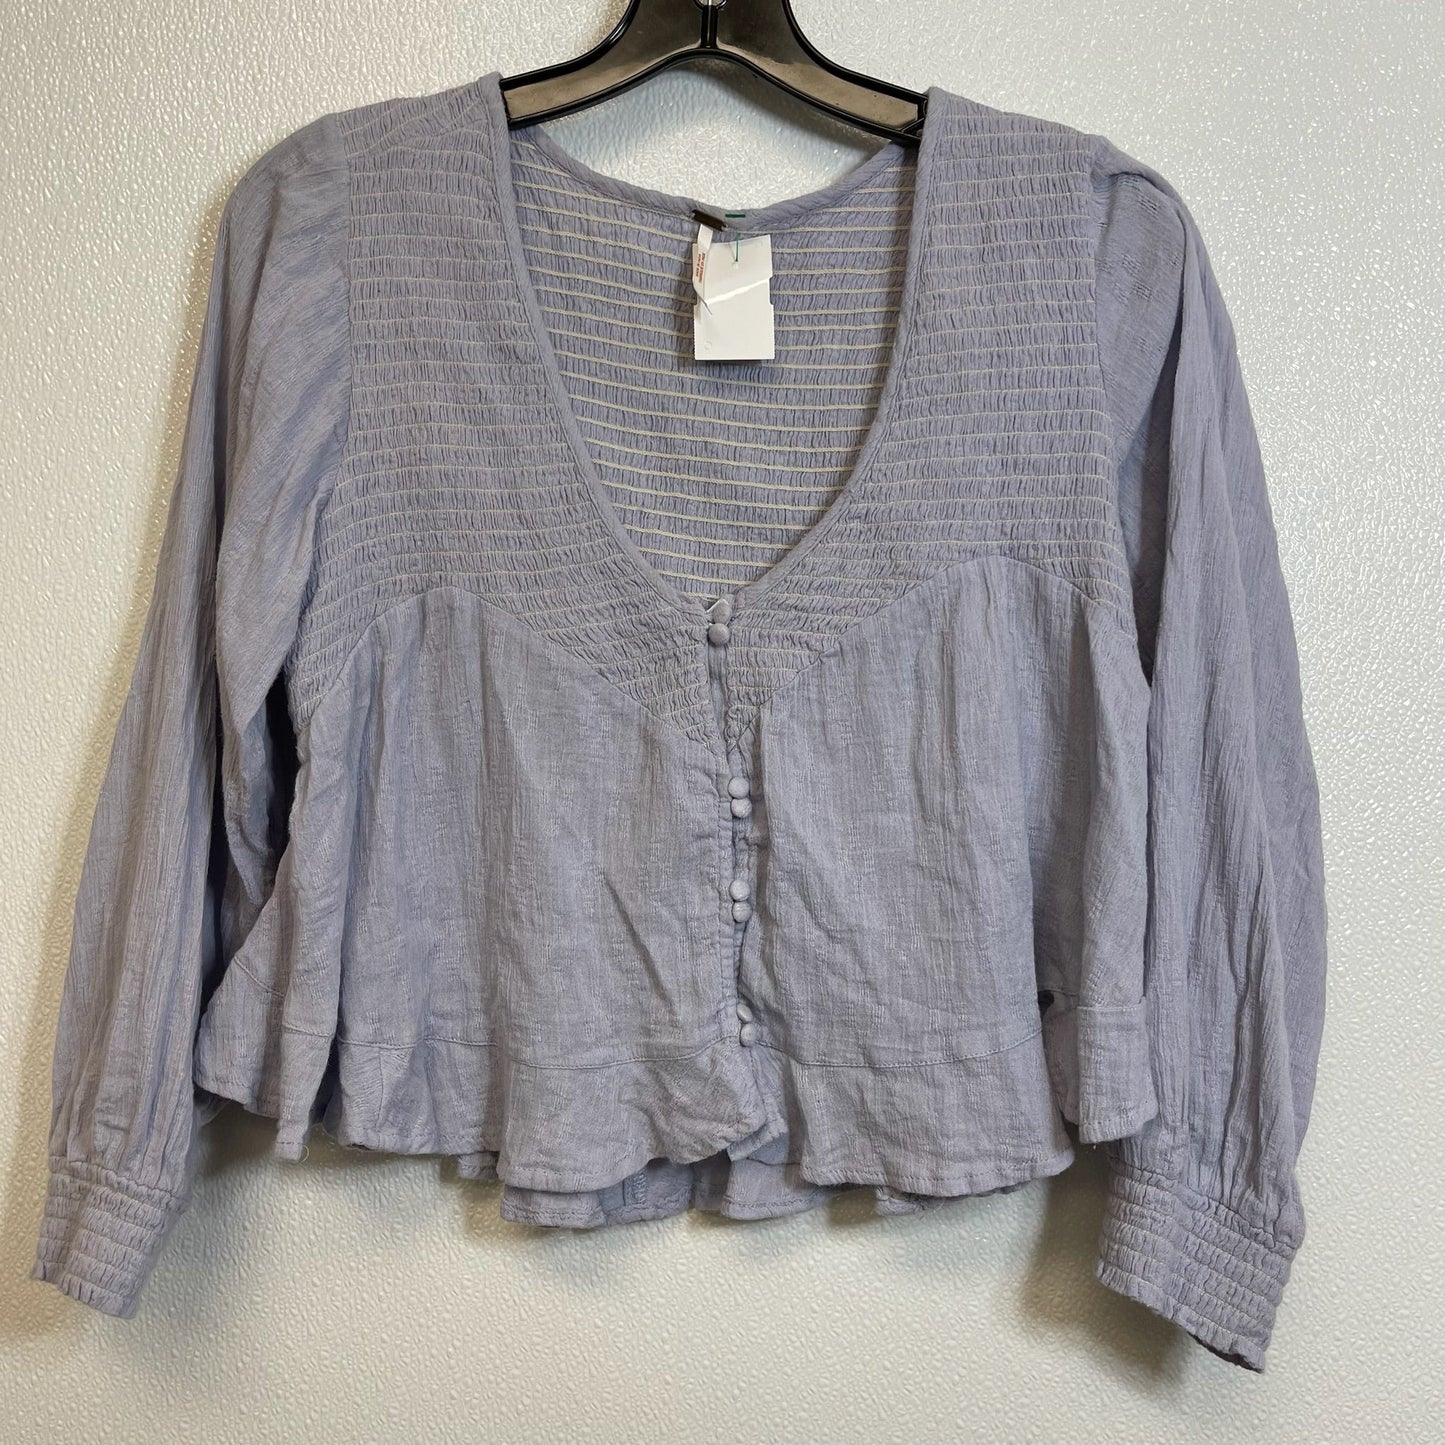 Lavender Top Long Sleeve Free People, Size M